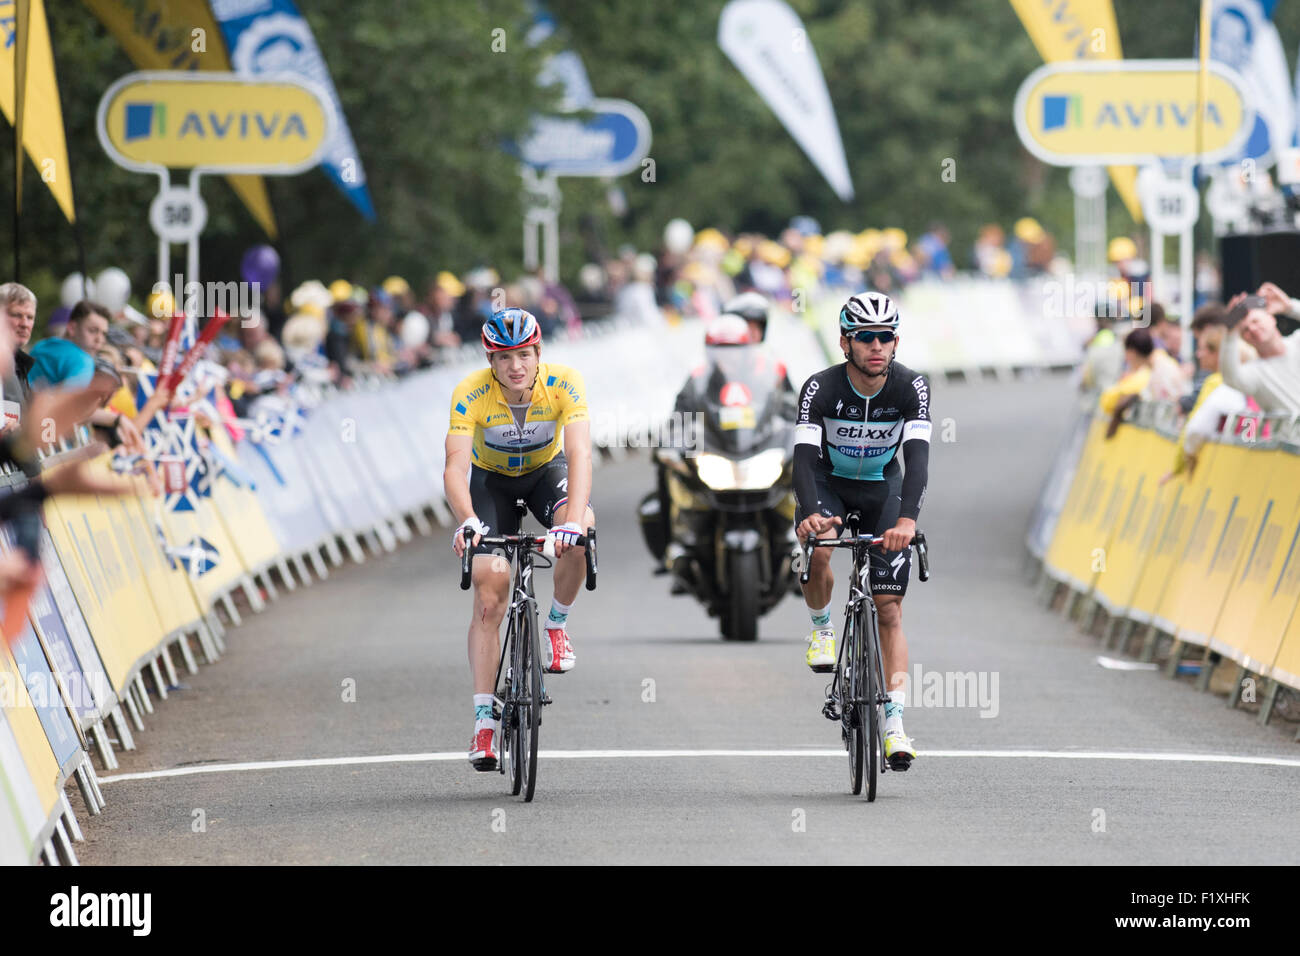 Floors Castle, Kelso, UK. 08th Sep, 2015. Race leader and yellow jersey wearer Petr Vakoc (Etixx-Quickstep) crosses the finishing line several minutes down on the leaders after being caught in a crash with 3.5km to go on stage three of the Aviva Tour of Britain between Cockermouth and Kelso, United Kingdom on 8 September 2015. The race, which covers 7 stages, started on 6 September in Beaumaris, Anglesey, and ends on 13 August in London, United Kingdom. Credit:  Andrew Peat/Alamy Live News Stock Photo